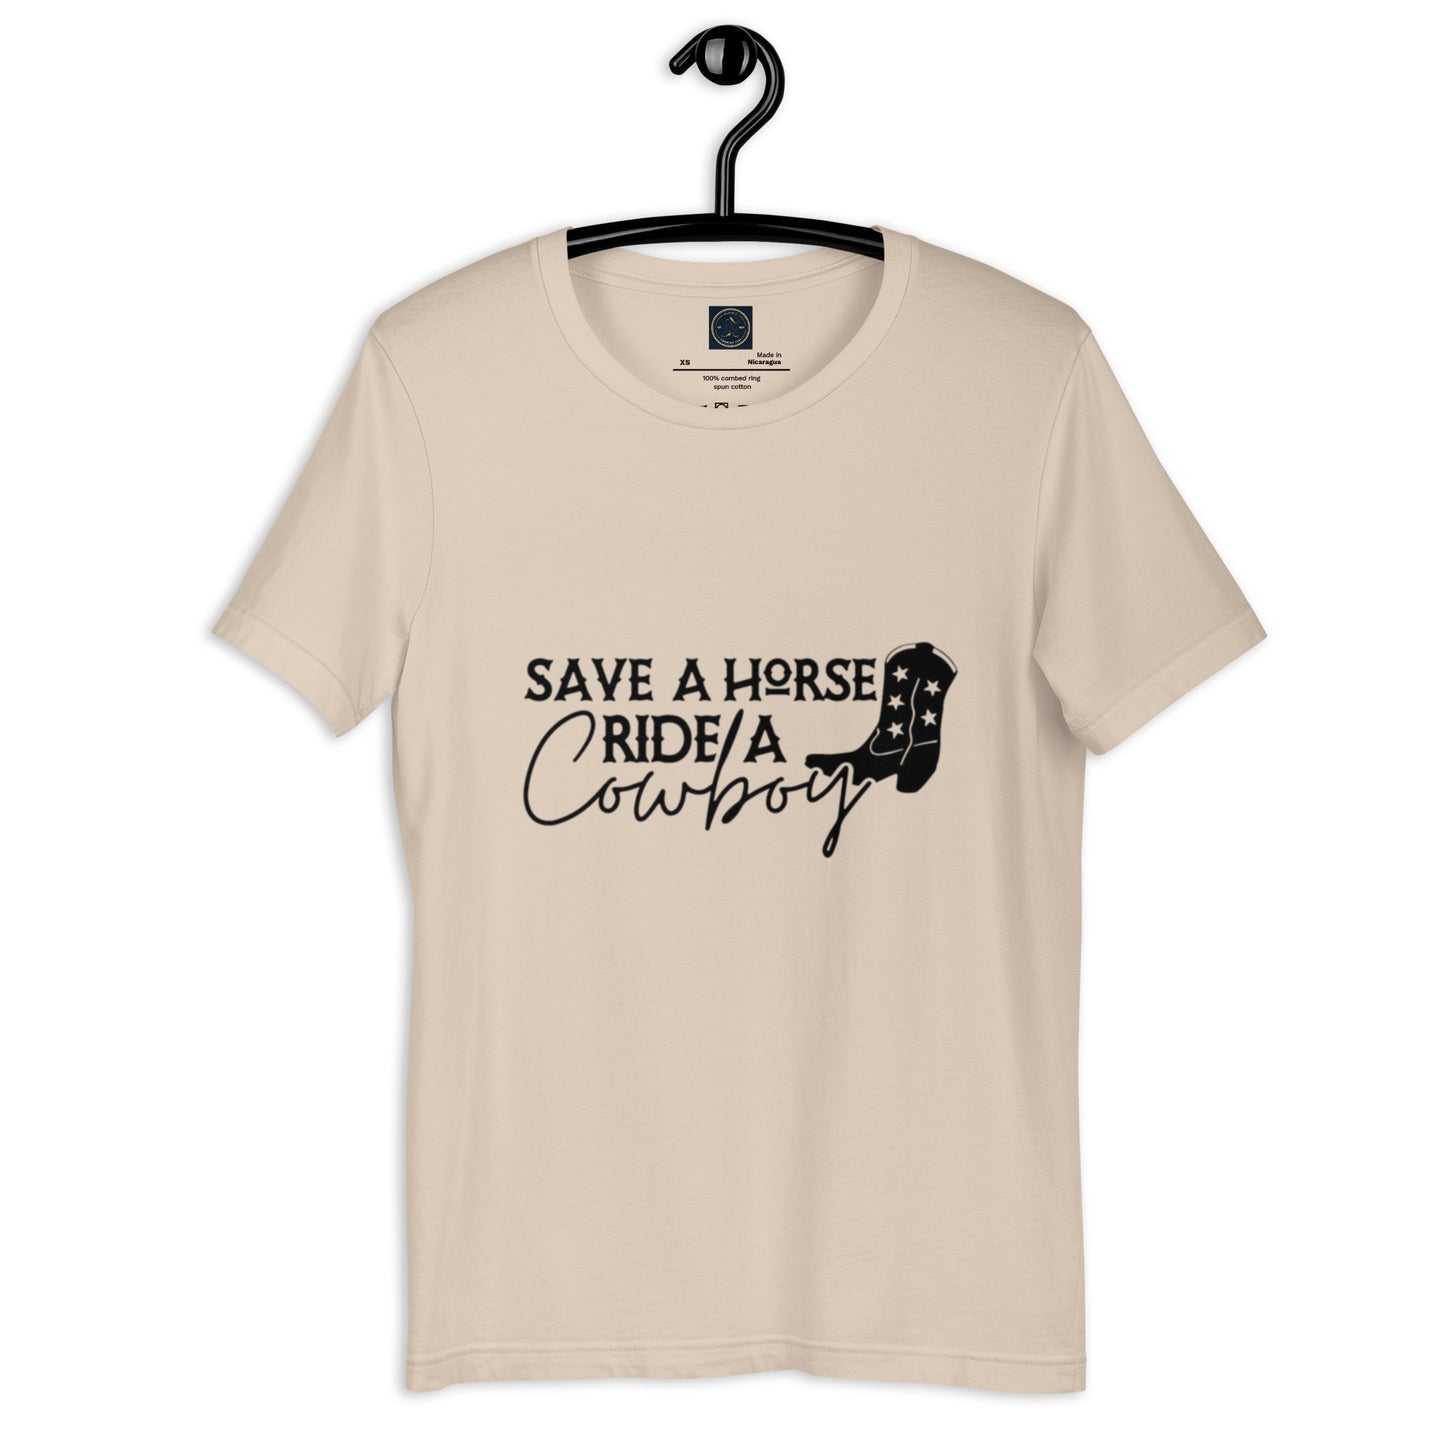 Save a Horse - Classic Country Tees